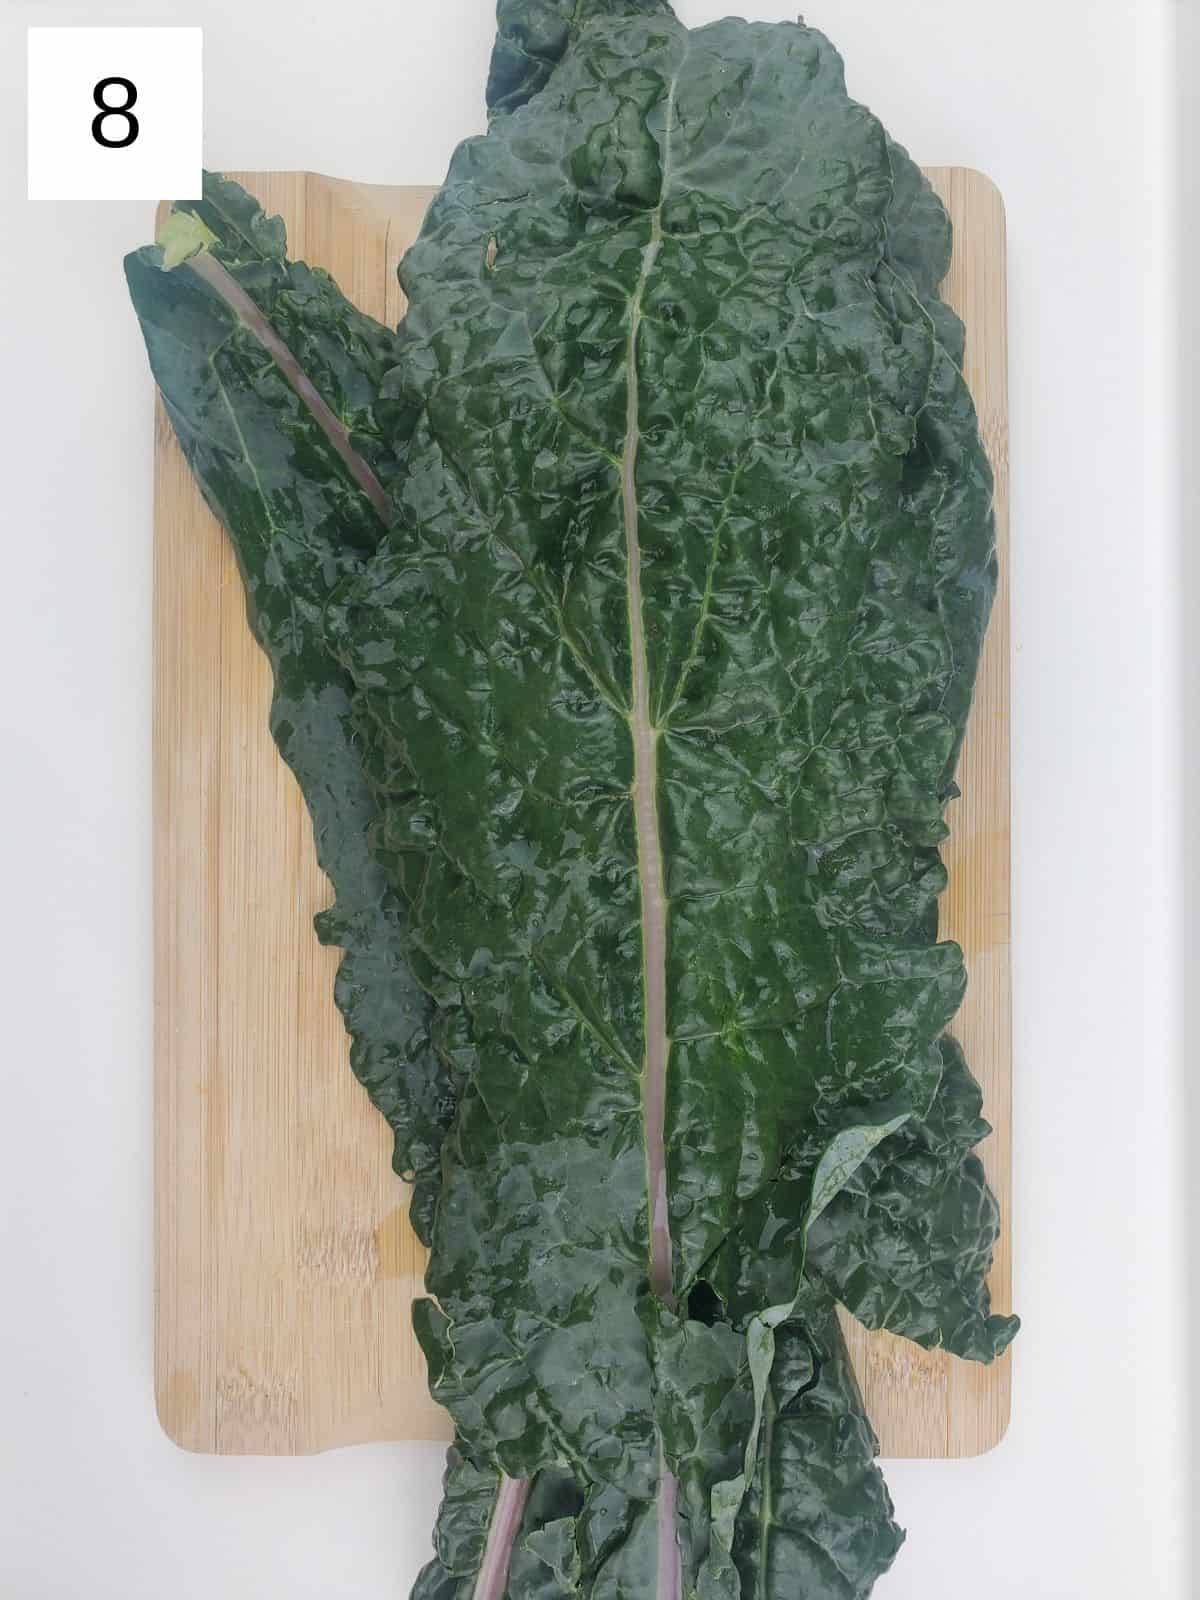 kale leaves on a wooden cutting board.